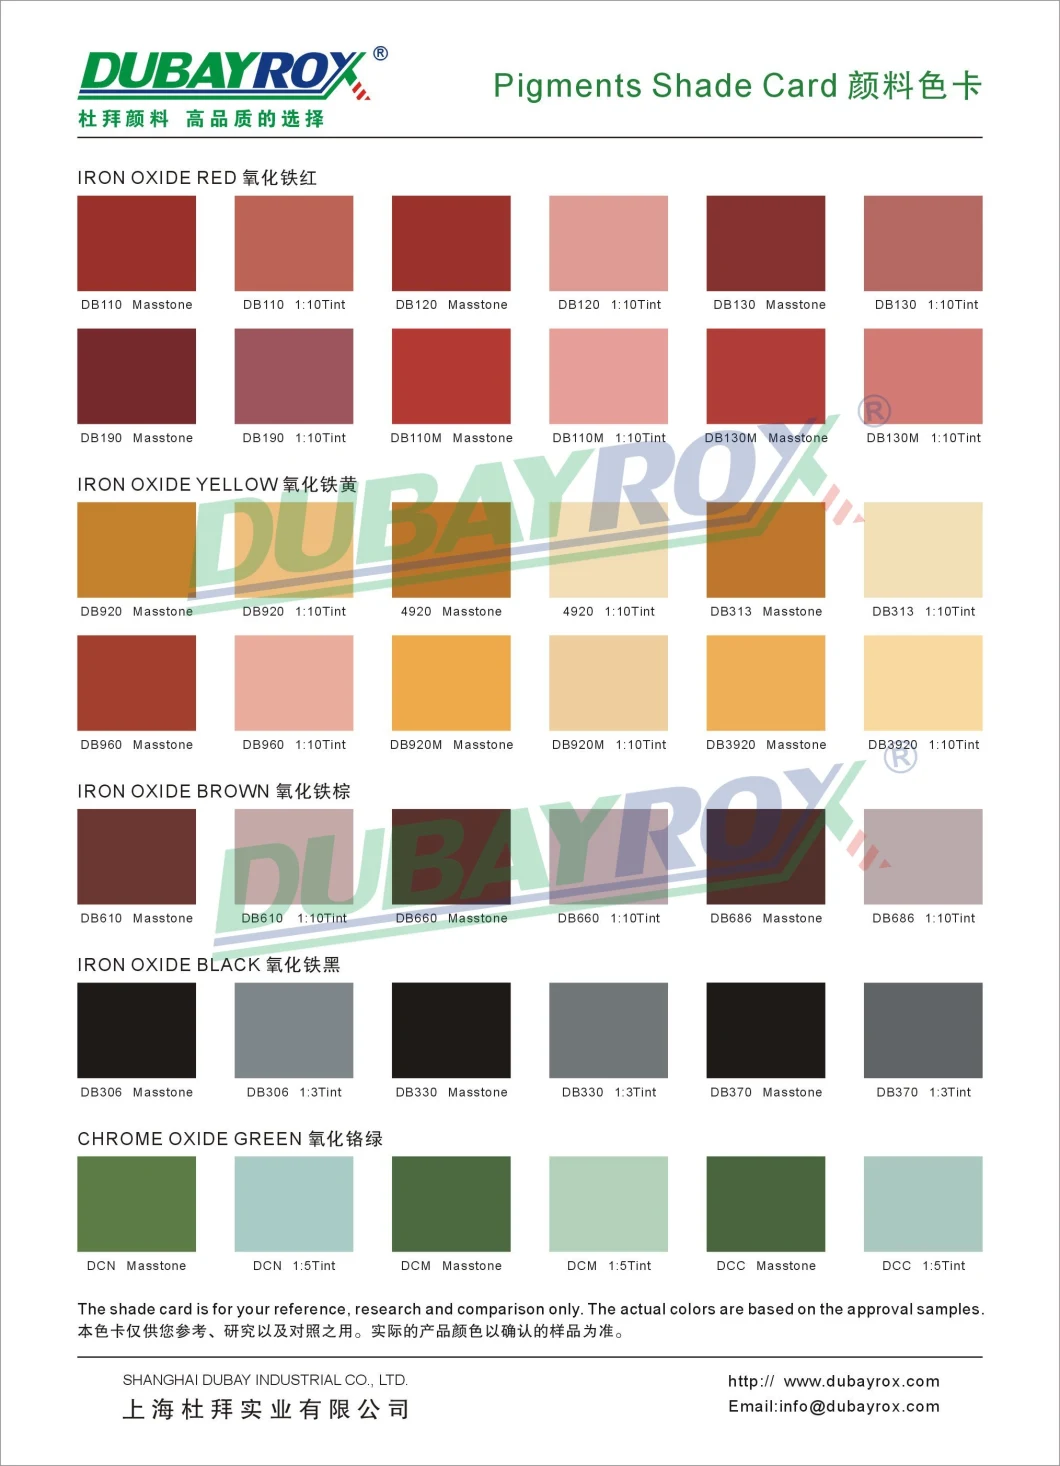 Iron Oxide for Saleiron Oxide Pigments Iron Oxide Yellow 313/920 Inorganic Pigment Iron Oxide Red Synthetic Iron Oxide Red dB110, dB130, dB190